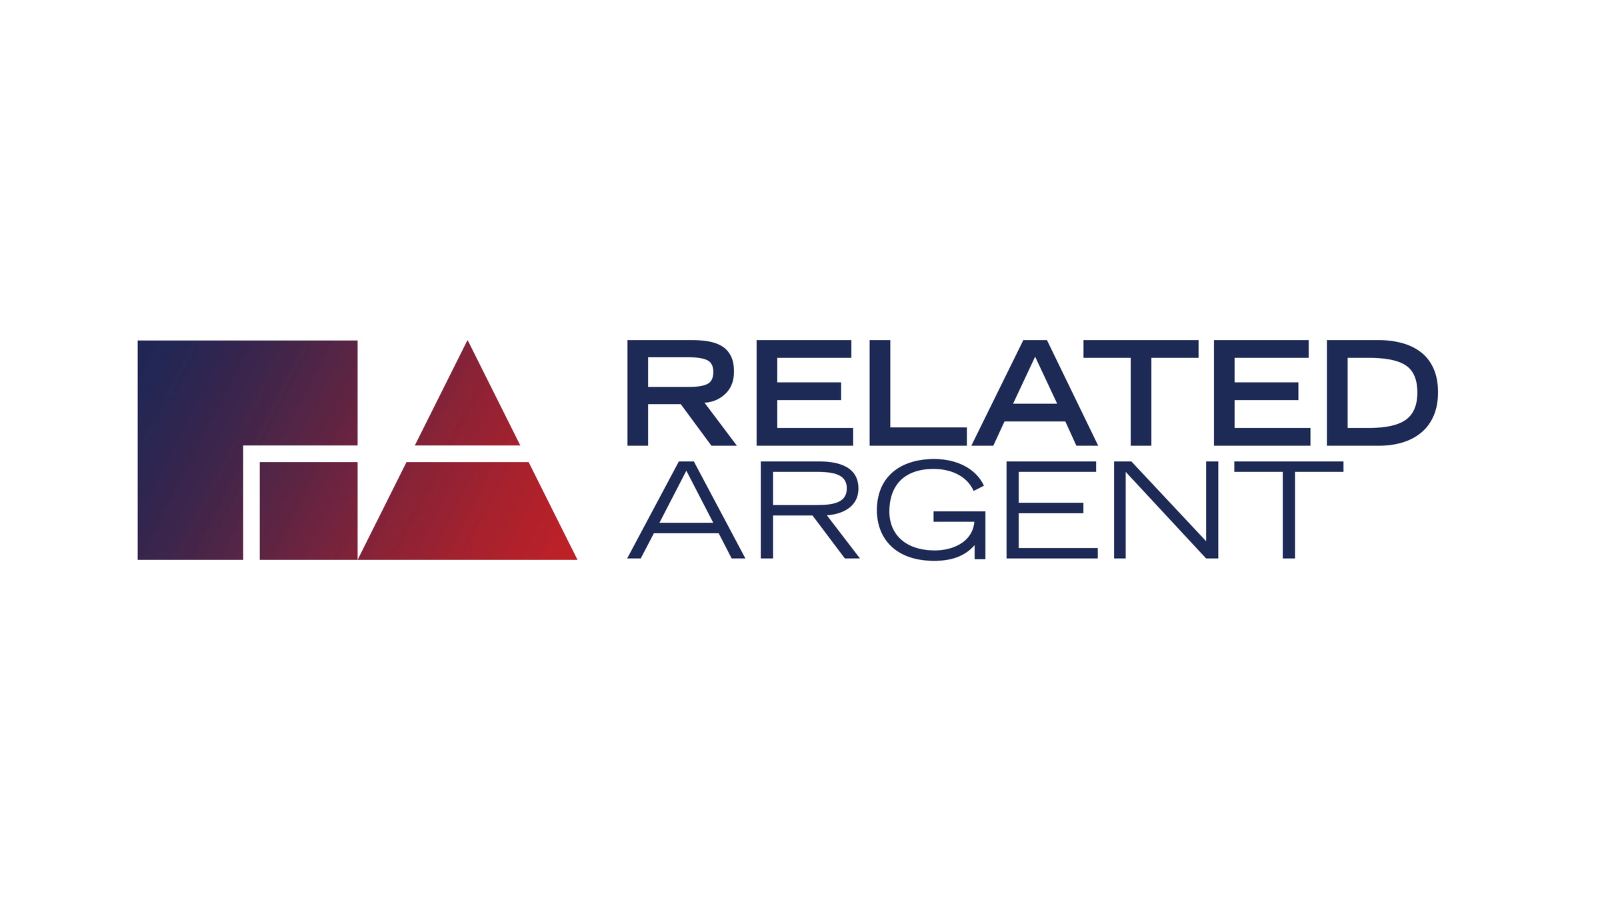 Related Argent logo